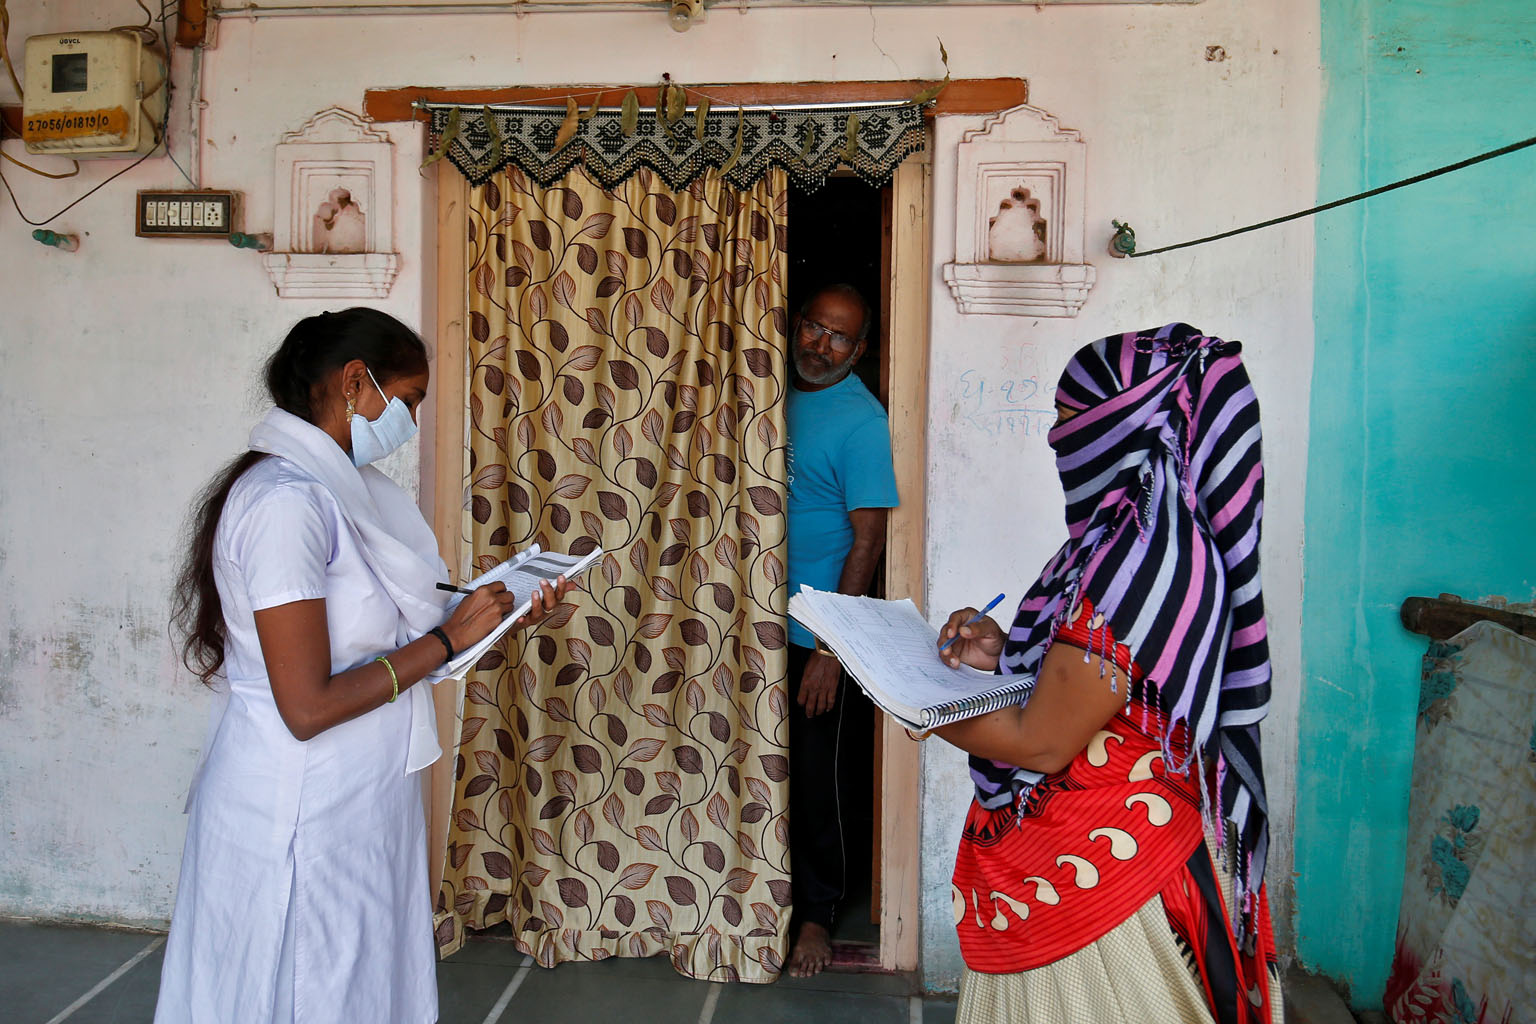 Health workers collect personal data from a man as they prepare a list during a door-to-door survey for the first shot of COVID-19 vaccine for people above 50 years of age and those with comorbidities, in a village on the outskirts of Ahmedabad, India, December 14, 2020. REUTERS/Amit Dave##########x##########